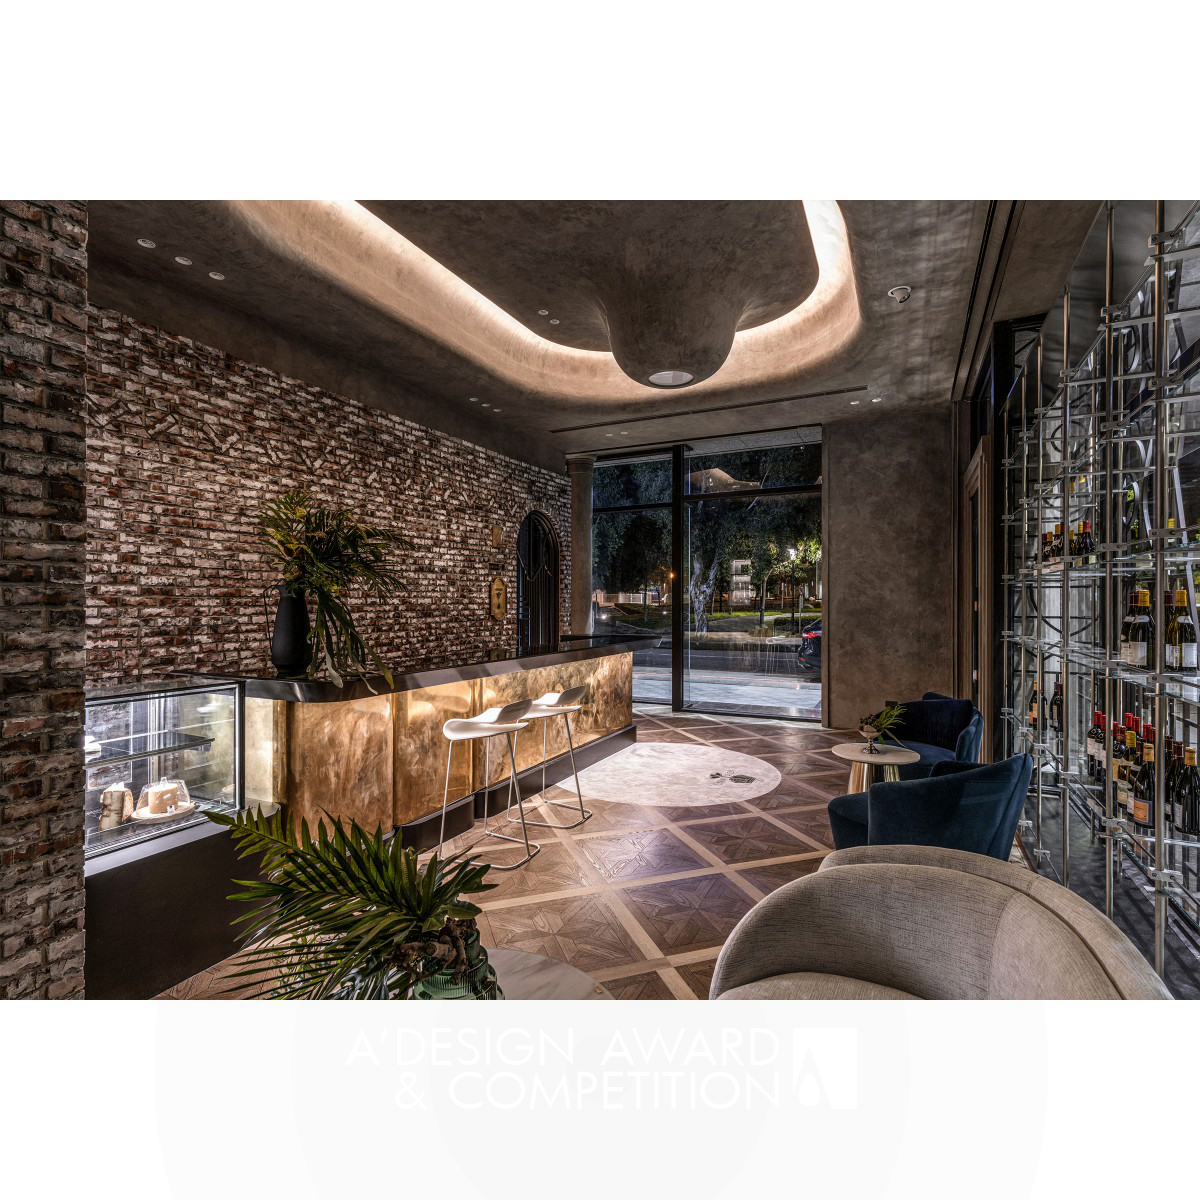 Champion Wine Cave by Hsin Ting Weng